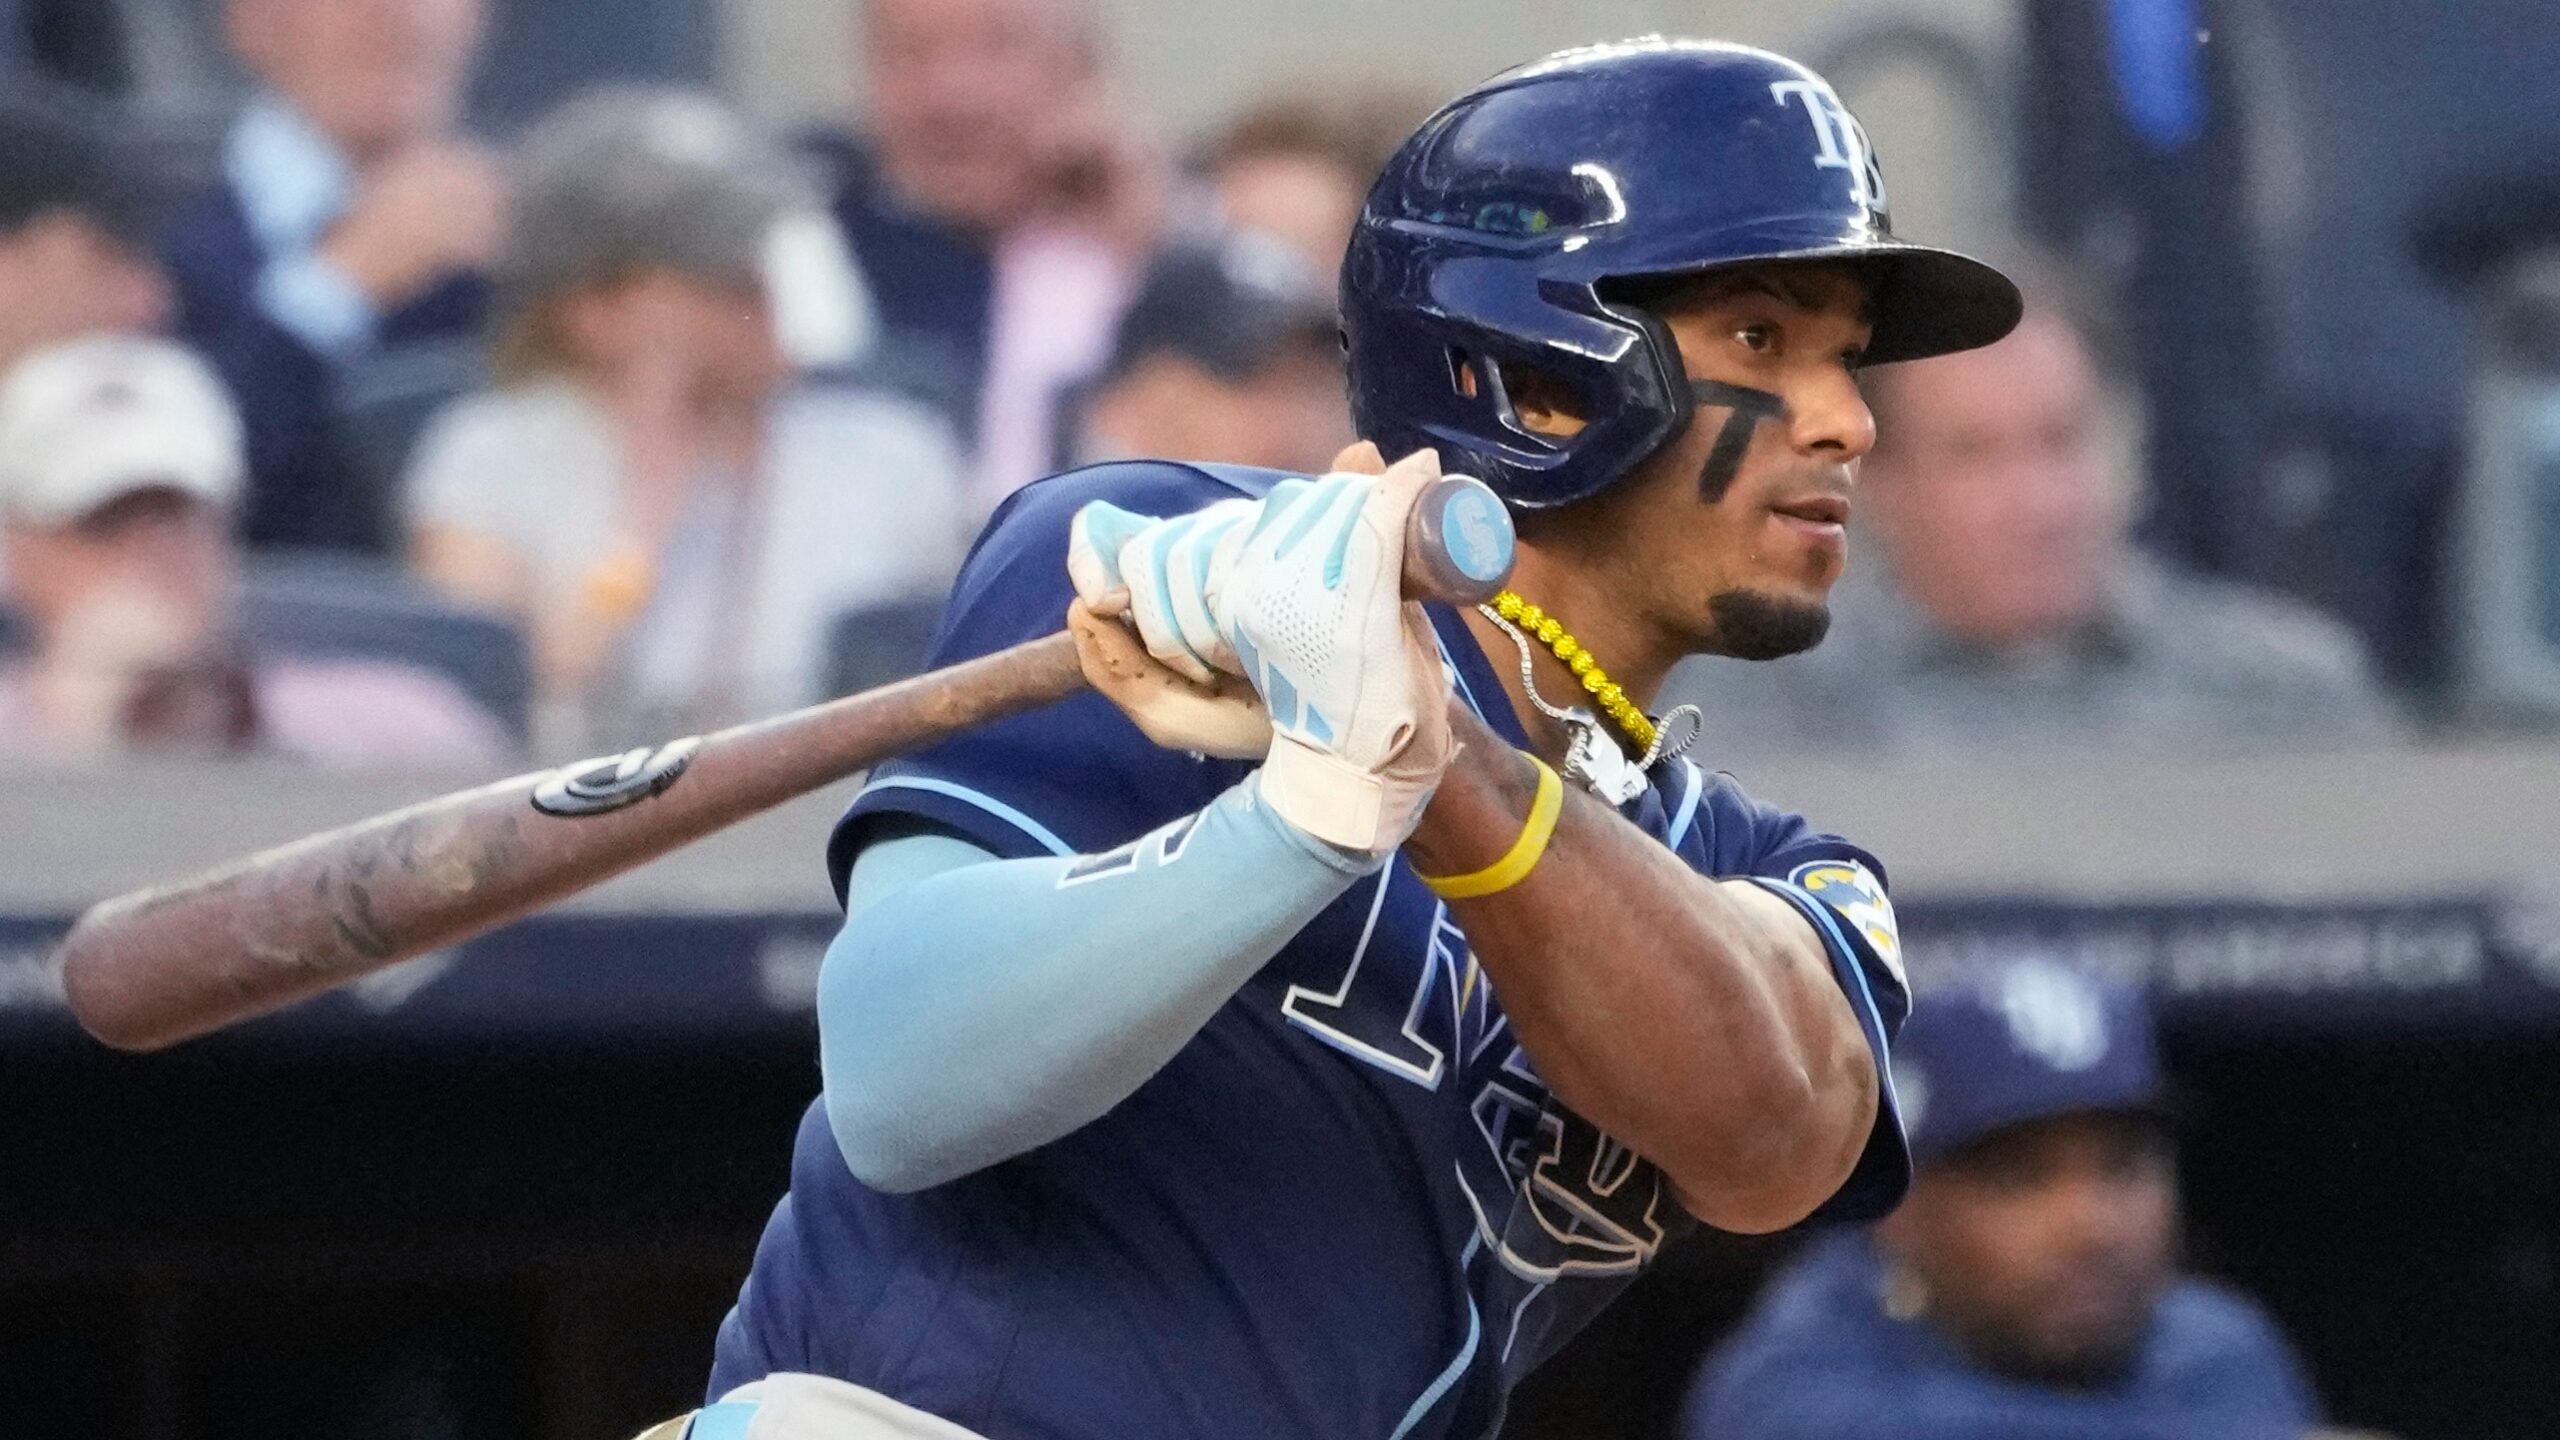 HELP WANTED – Rays shortstop - Through The Fence Baseball